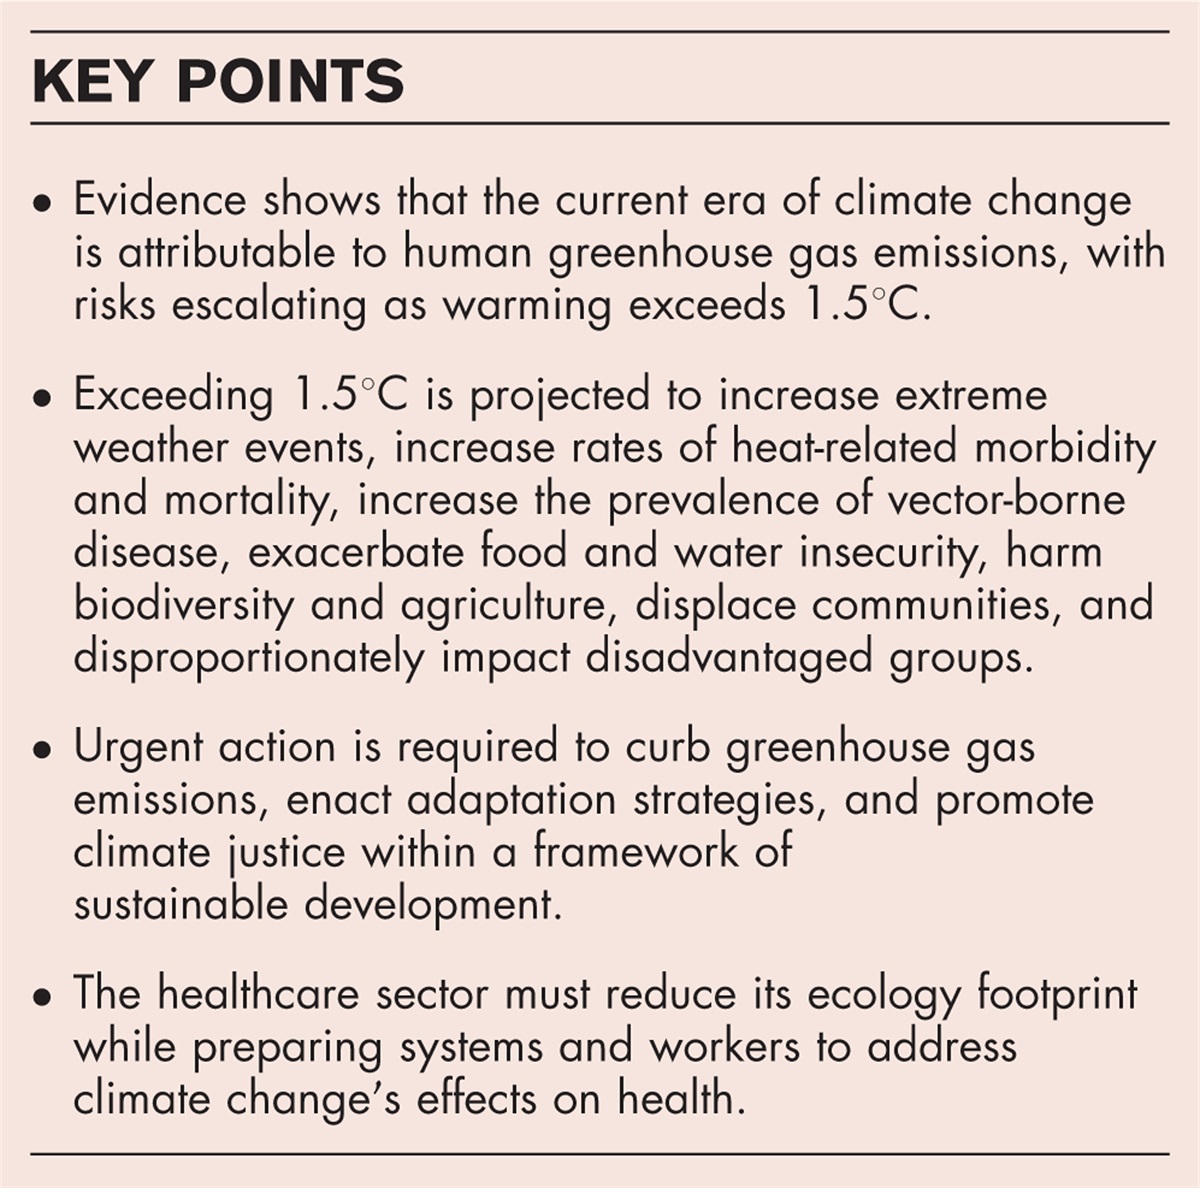 Heating up: climate change and the threat to human health